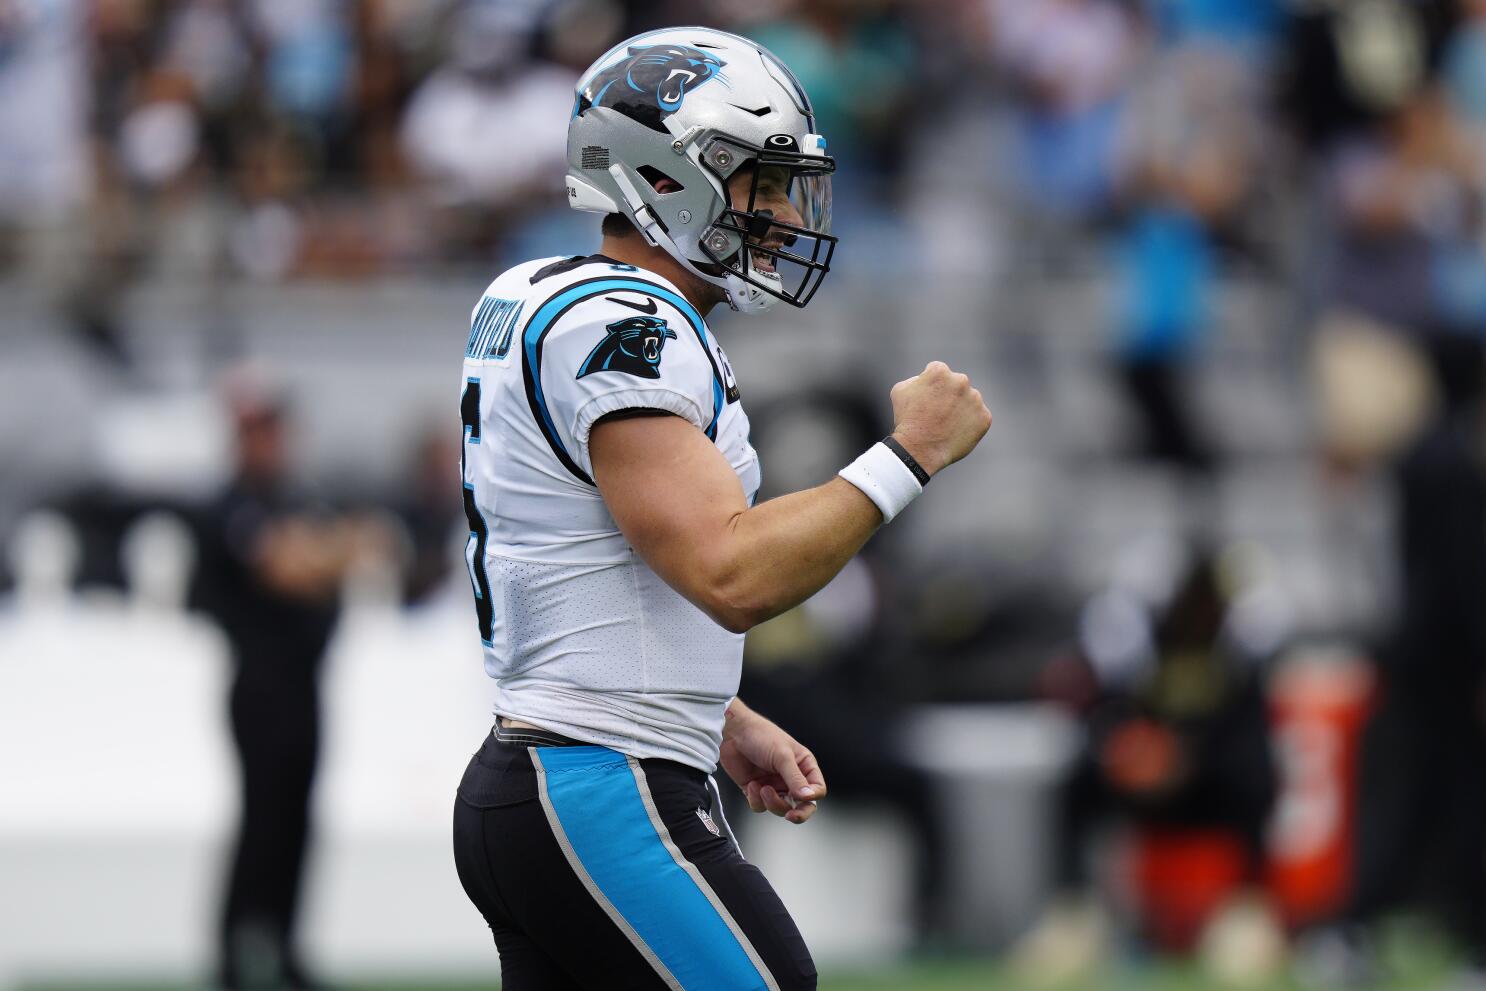 PFF on X: The Panthers are expected to release Baker Mayfield